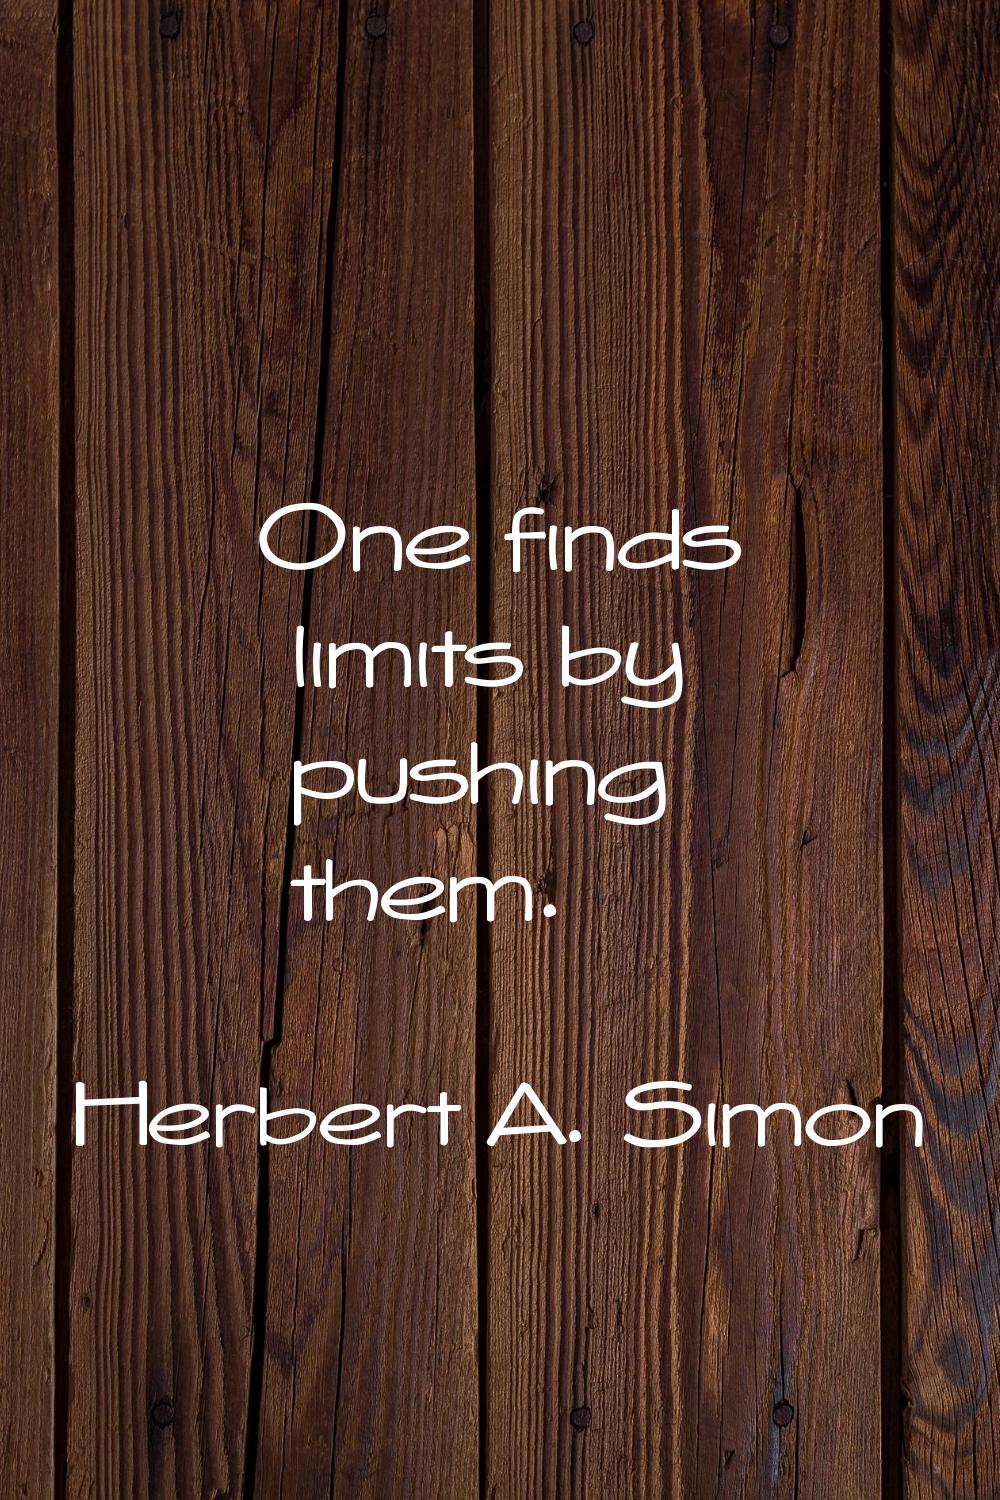 One finds limits by pushing them.